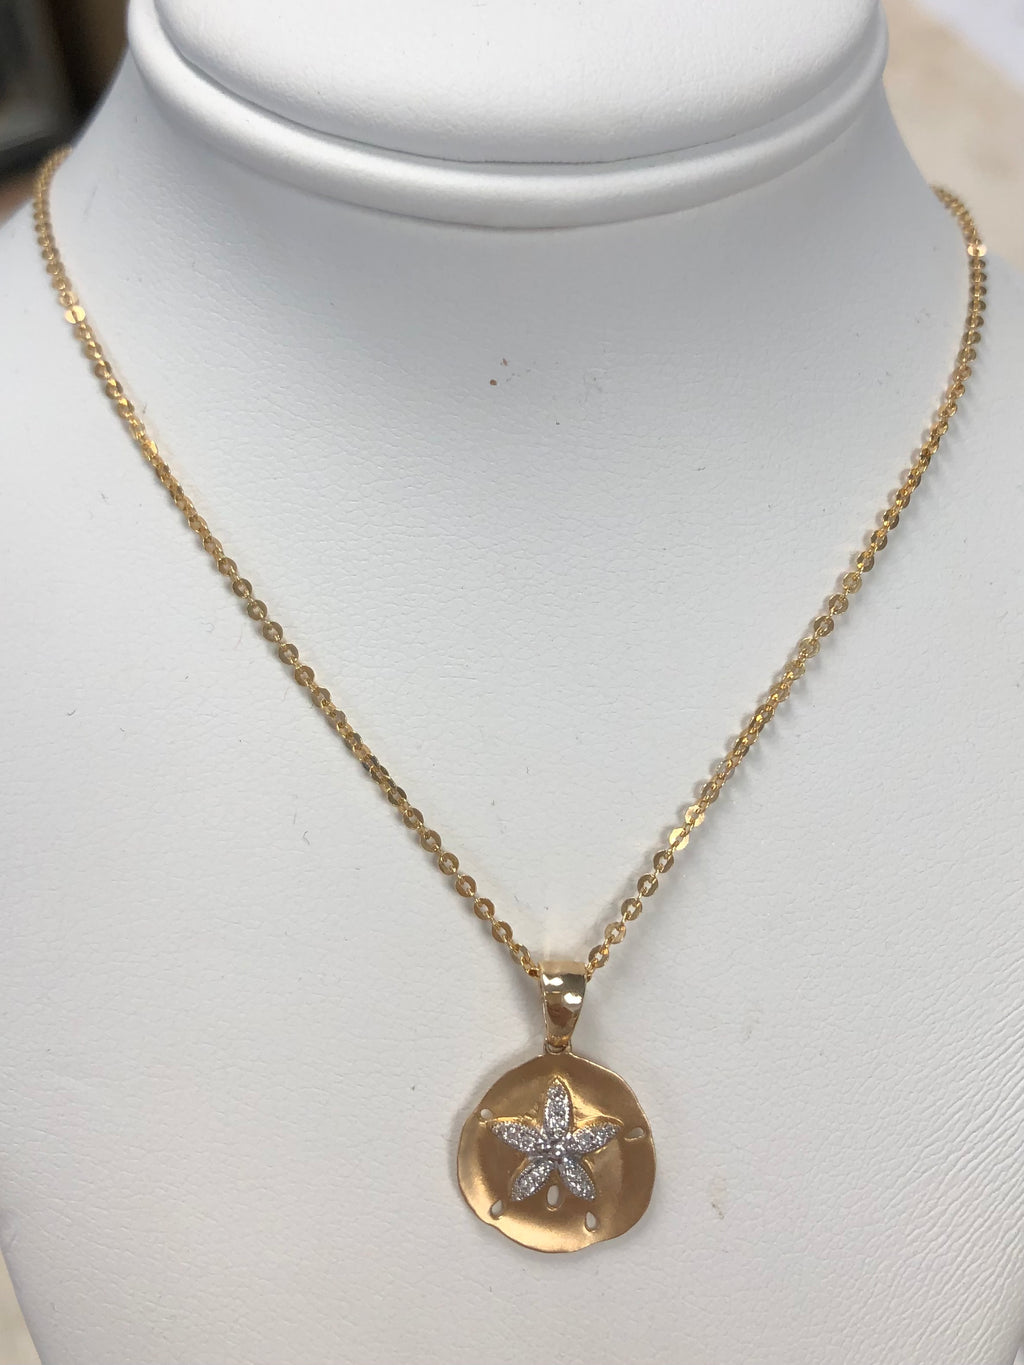 Yellow Gold & Diamonds Sand Dollar Necklace, Adjustable to 18